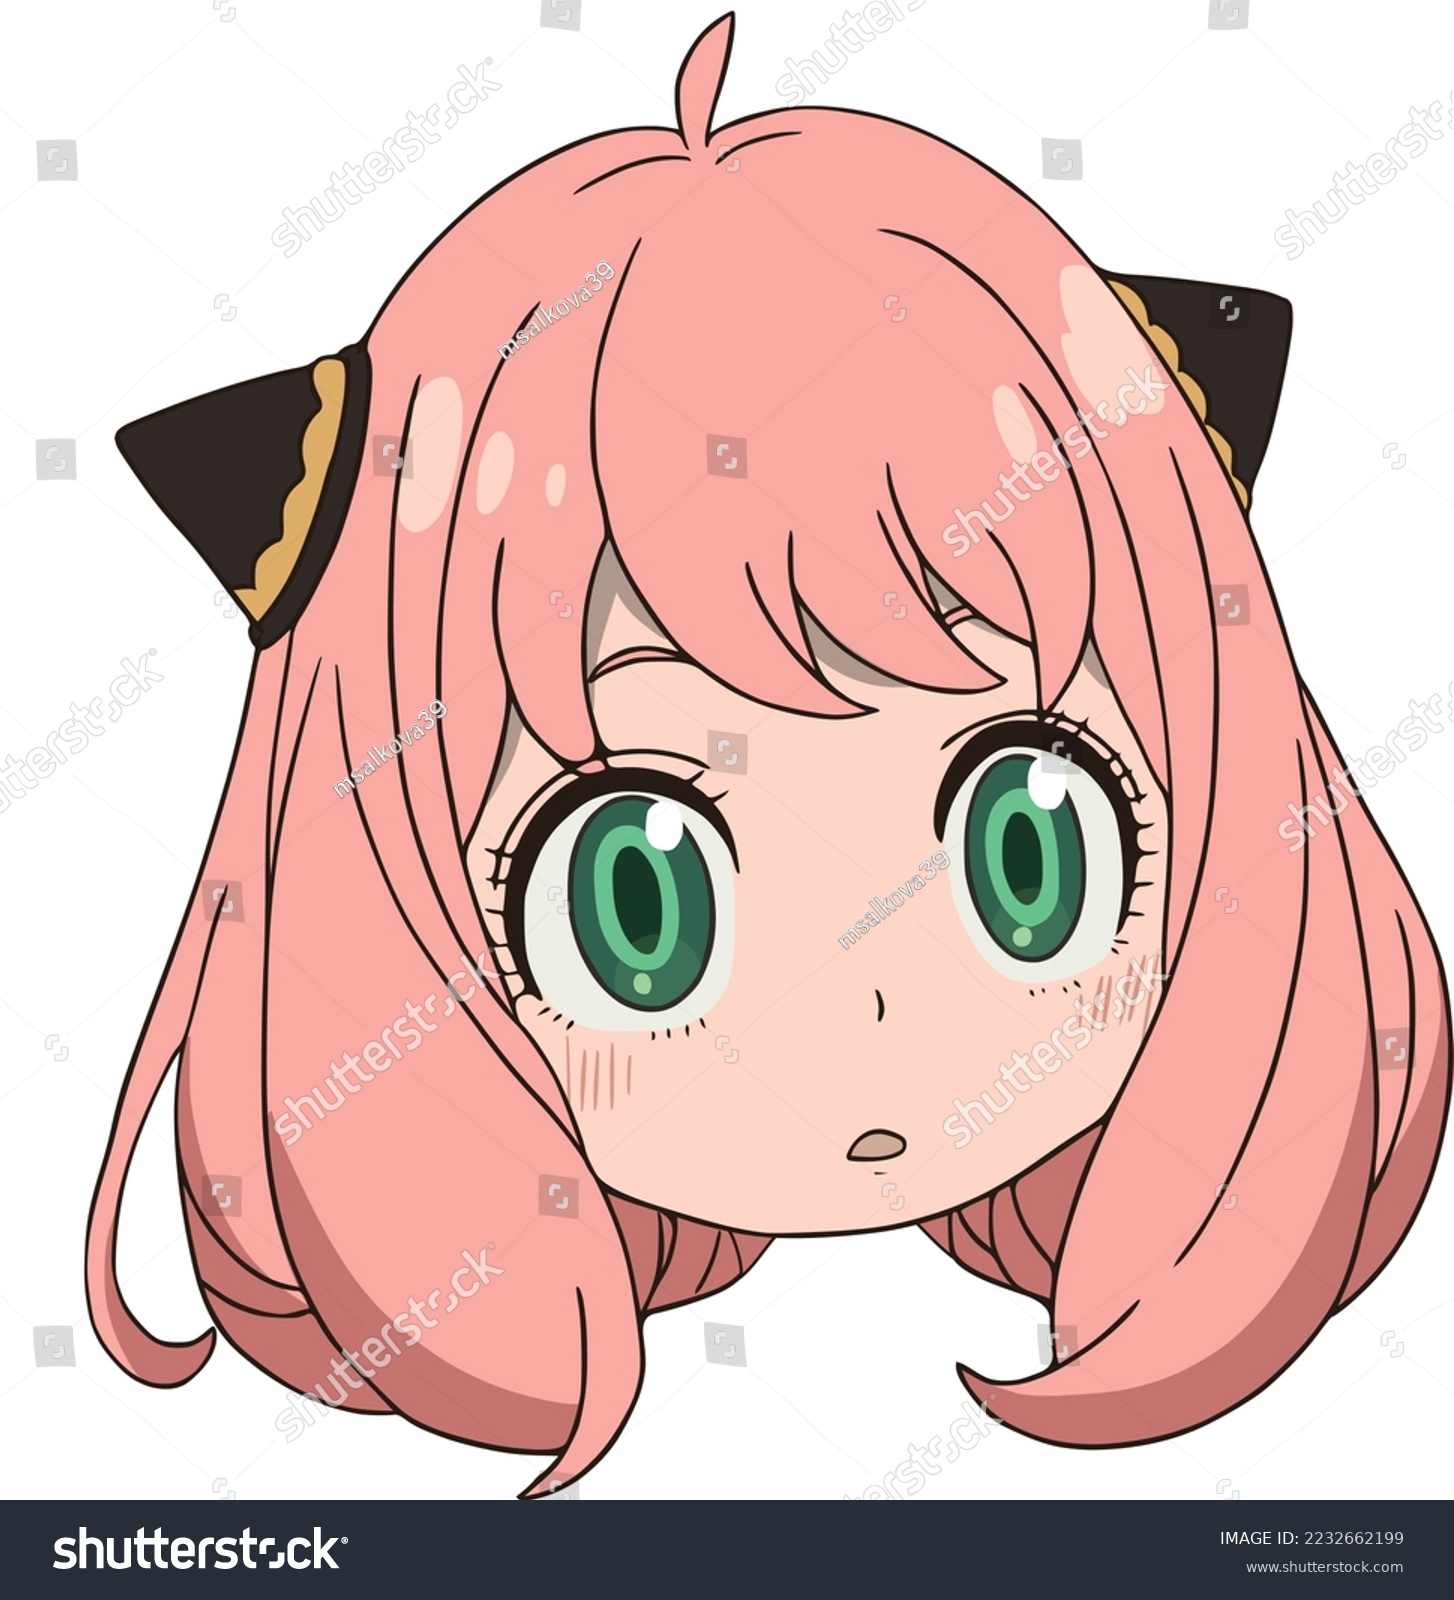 SVG of Surprised girl with wide open green eyes, pink blush on her cheeks, the girl has ears and lush pink hair, only a head without a body, pattern svg